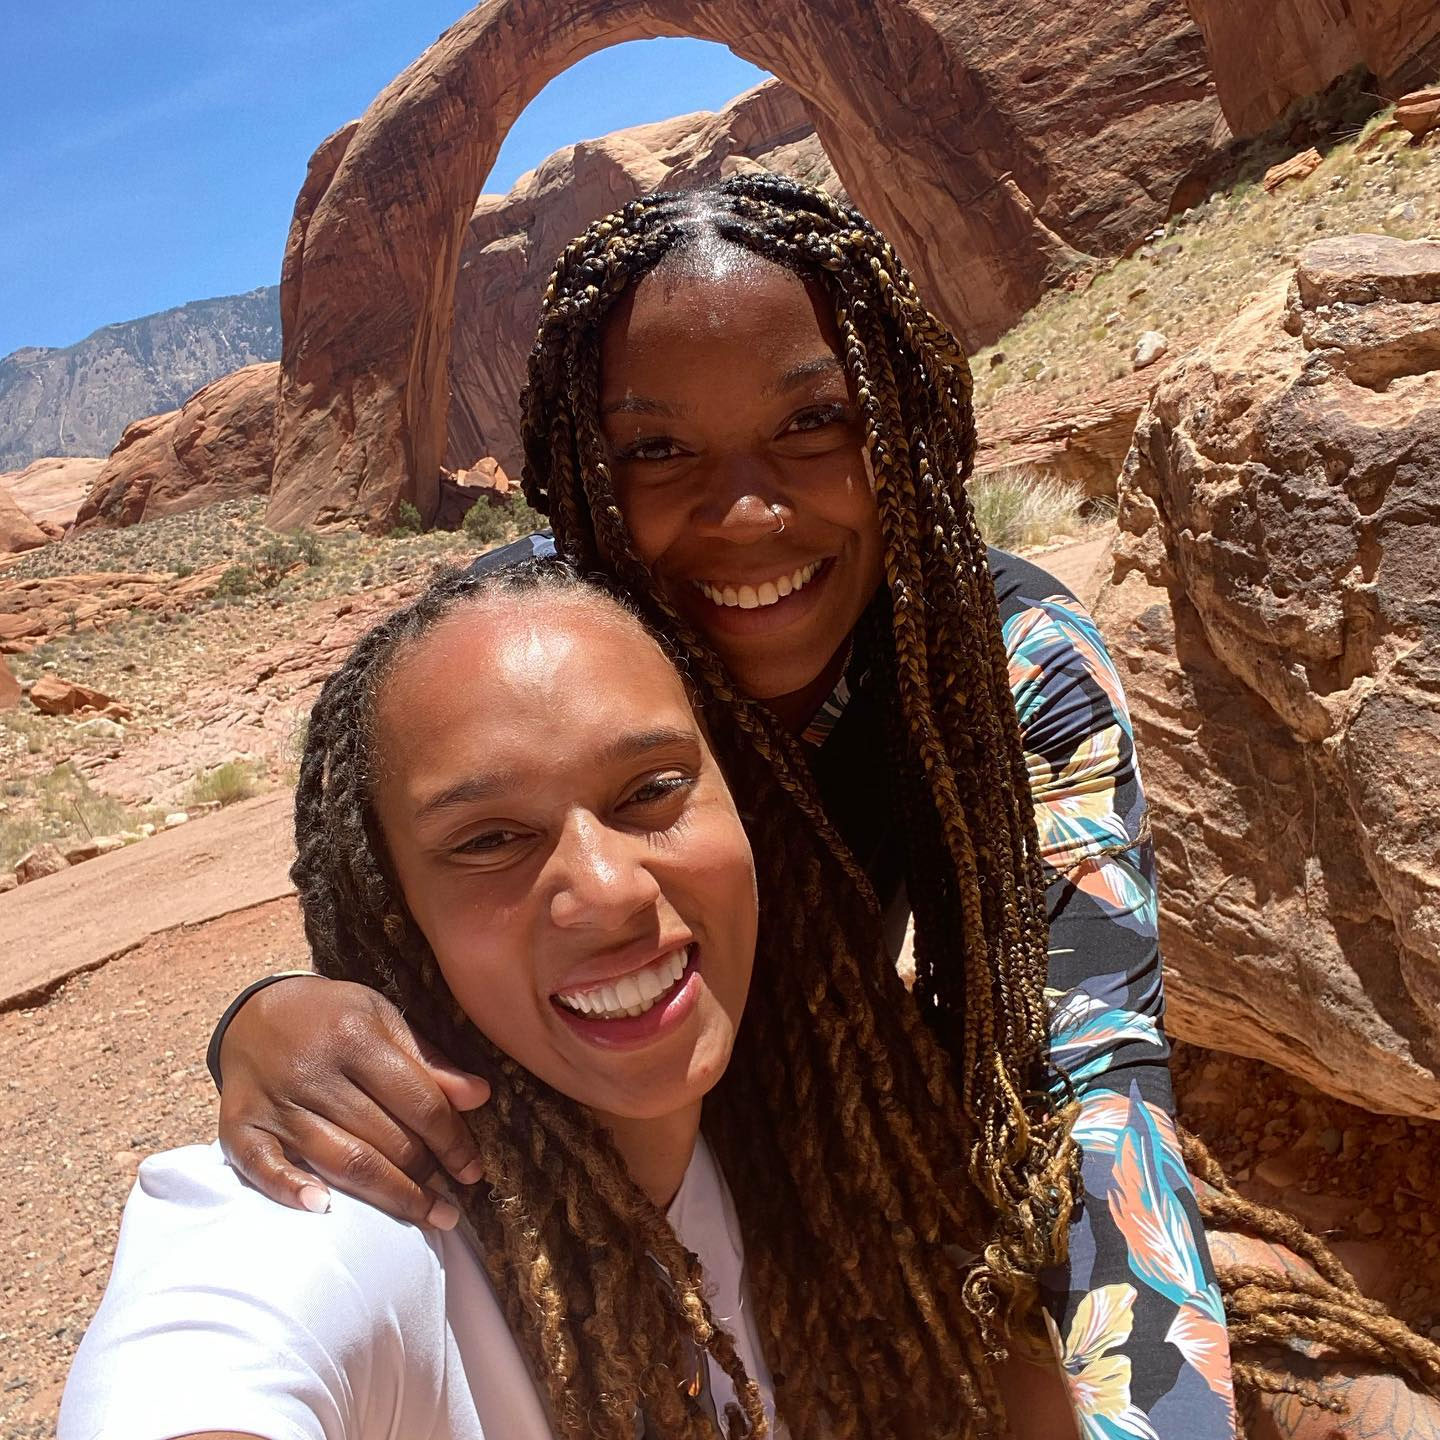 Not Forgotten:” Cherelle Griner Asks for Letters to Wife Brittney Griner